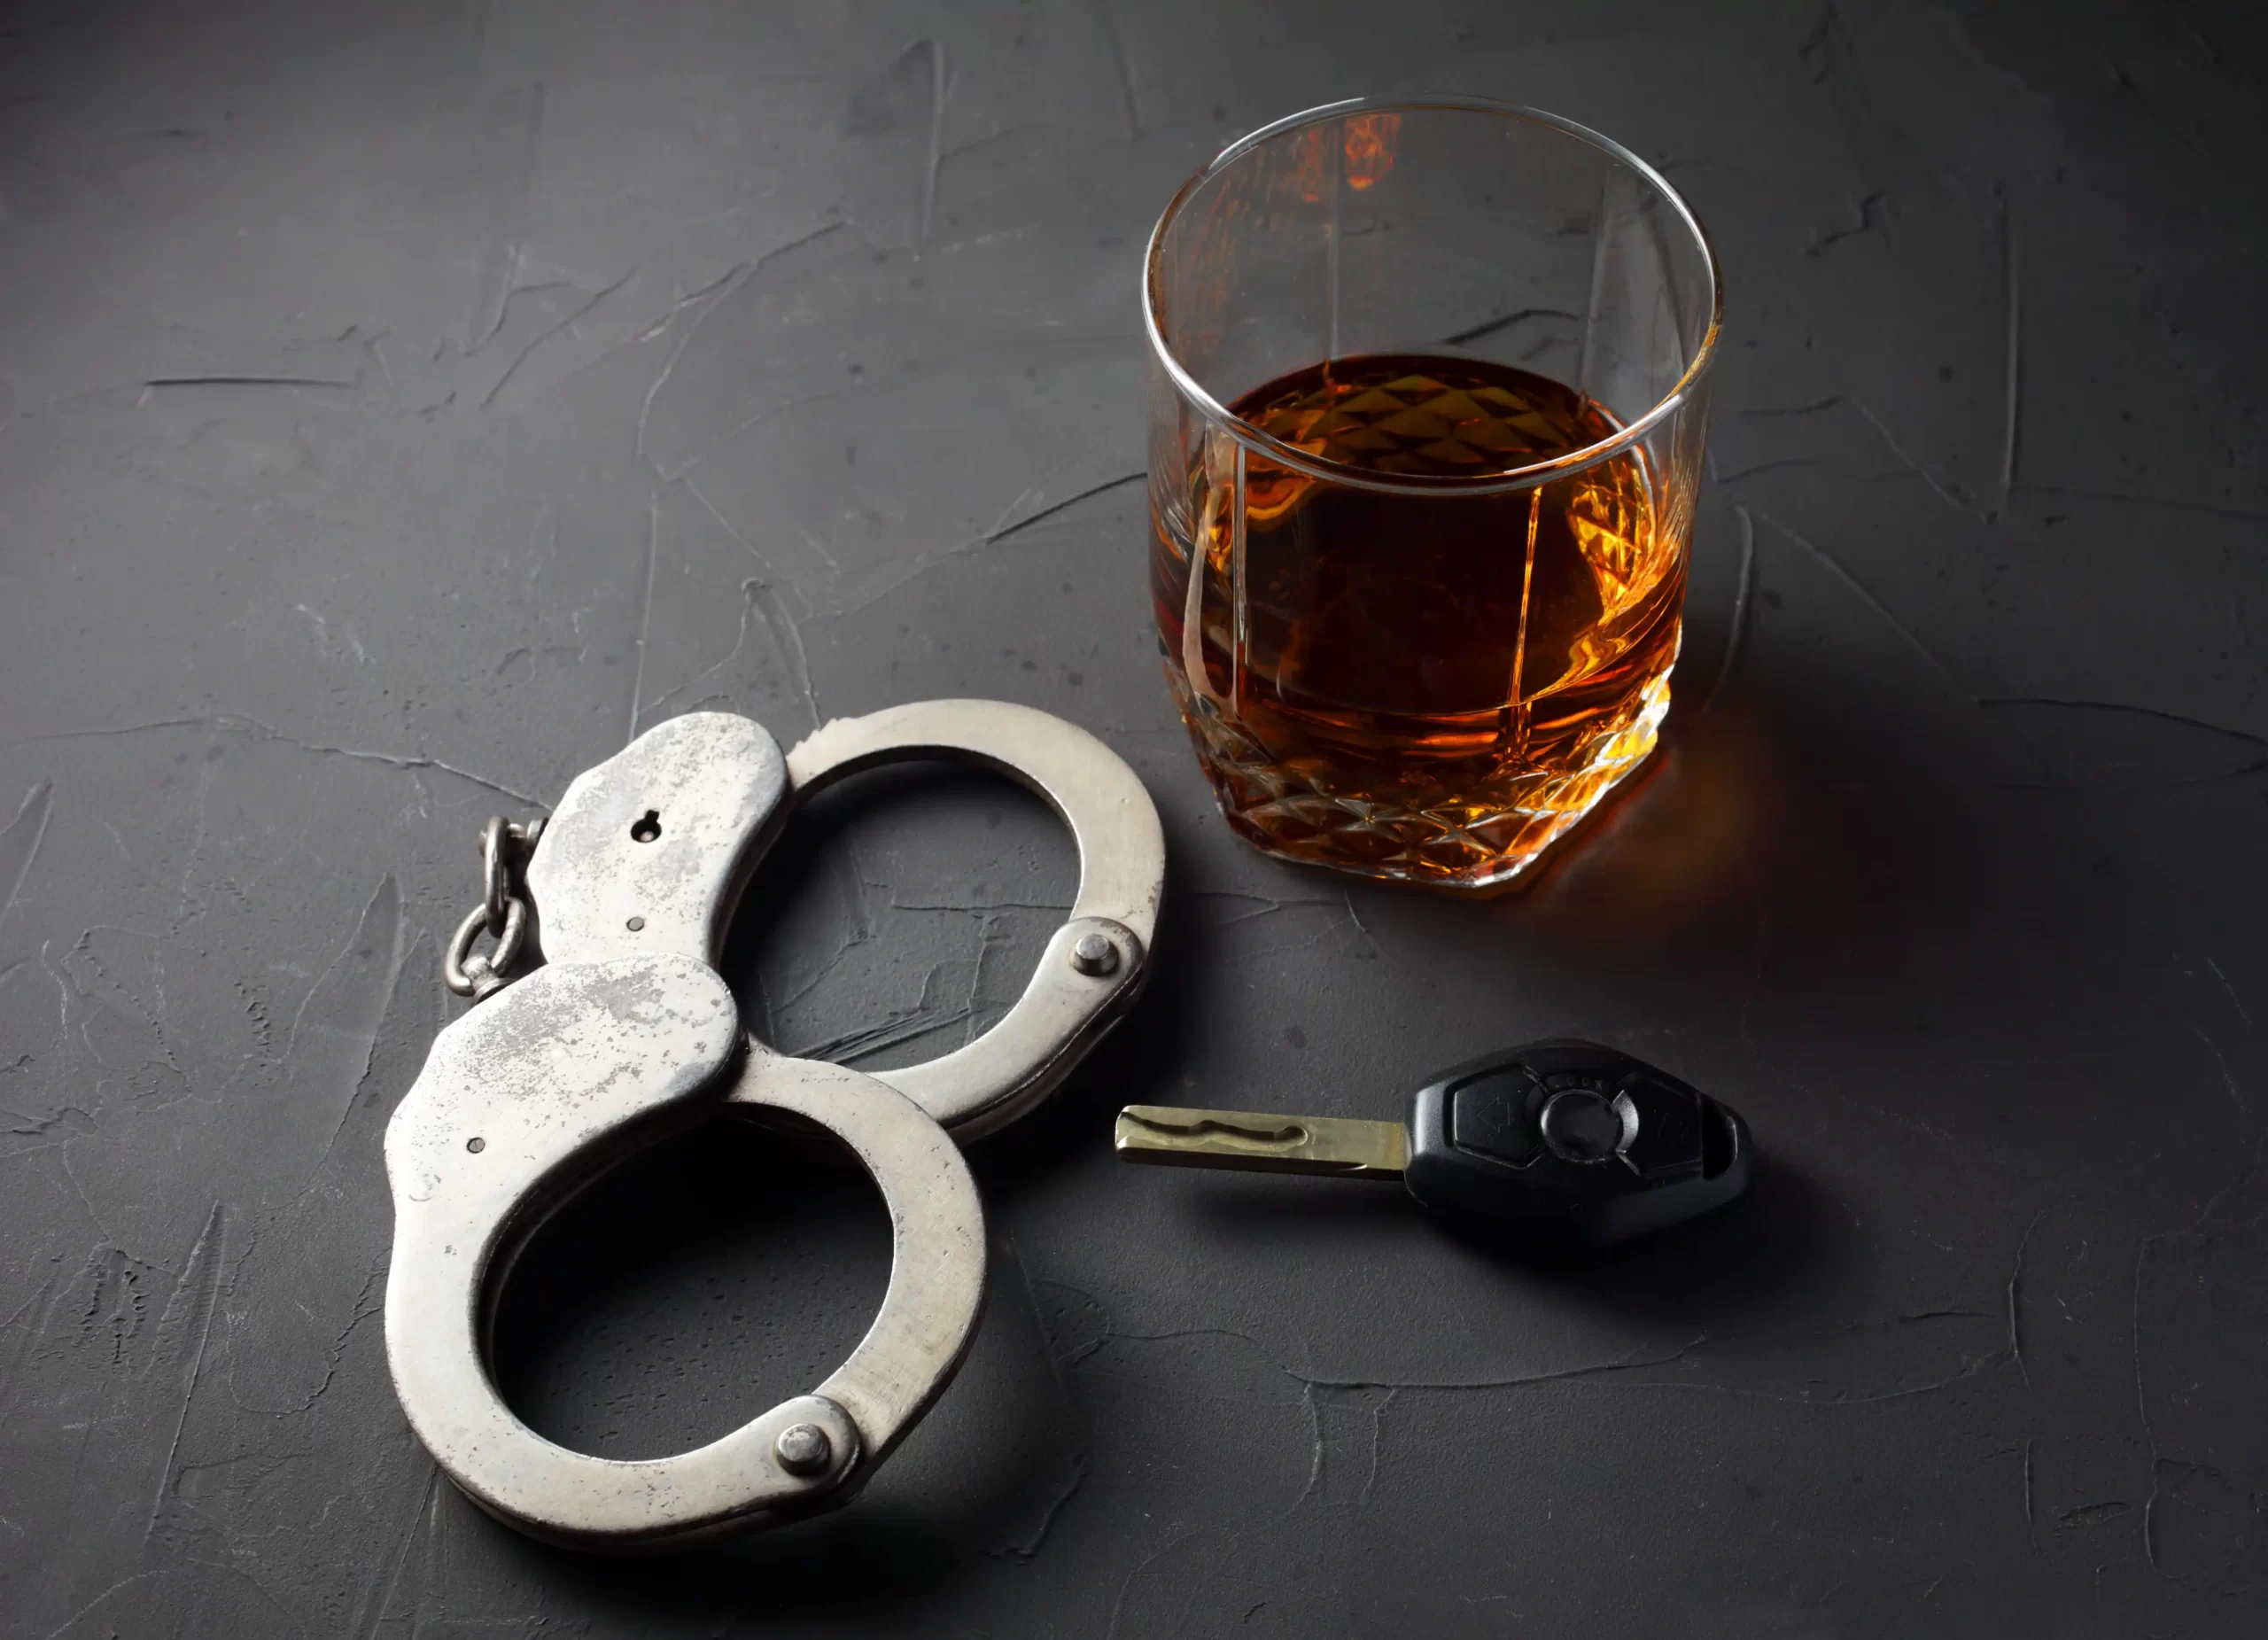 First Offense DWI in NC